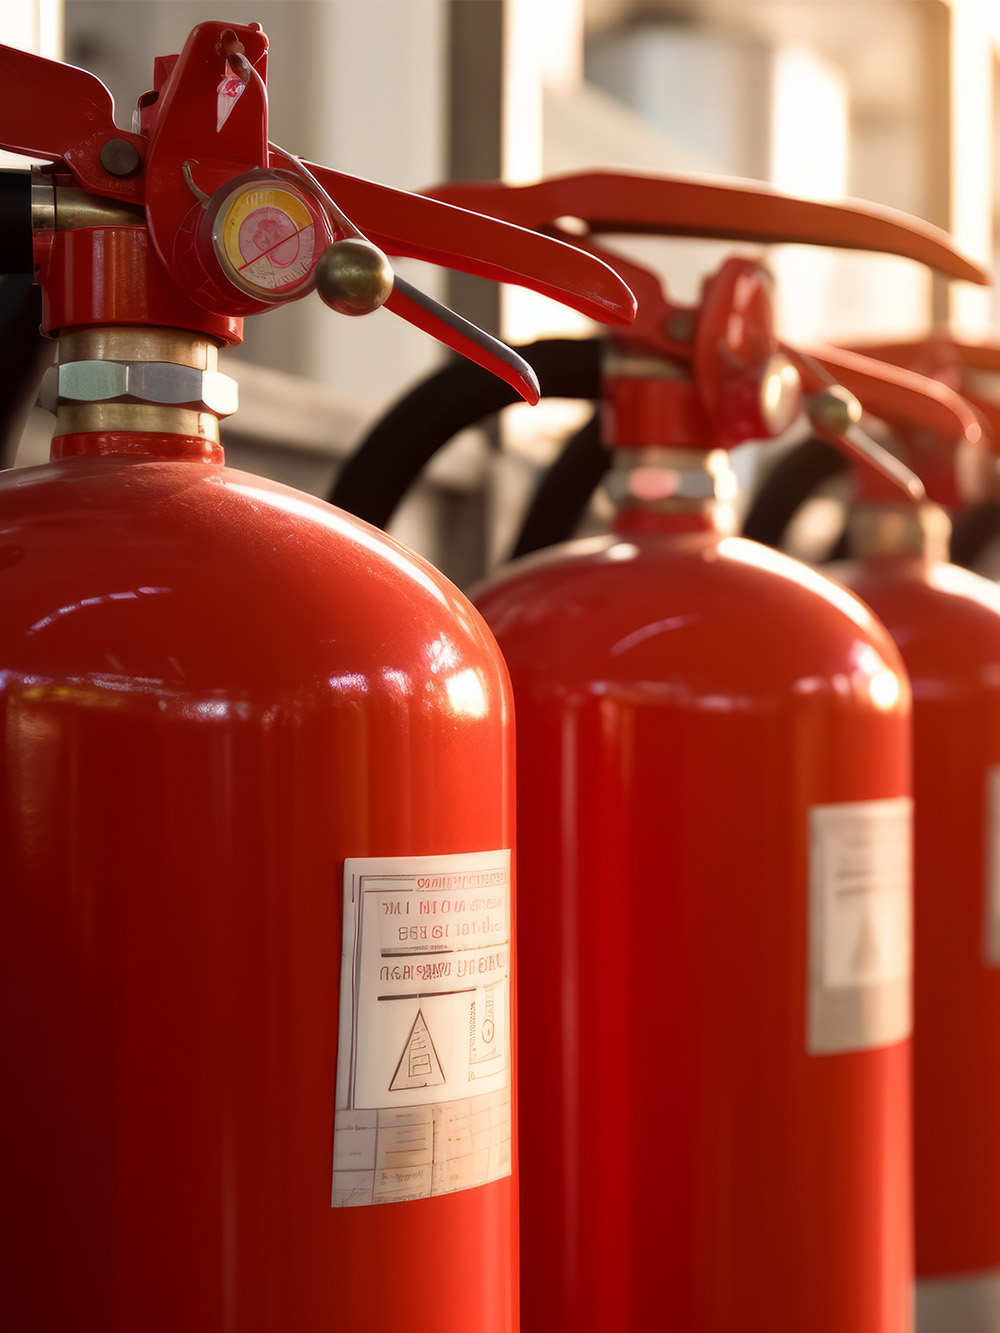 Fire protection - fire extinguishers